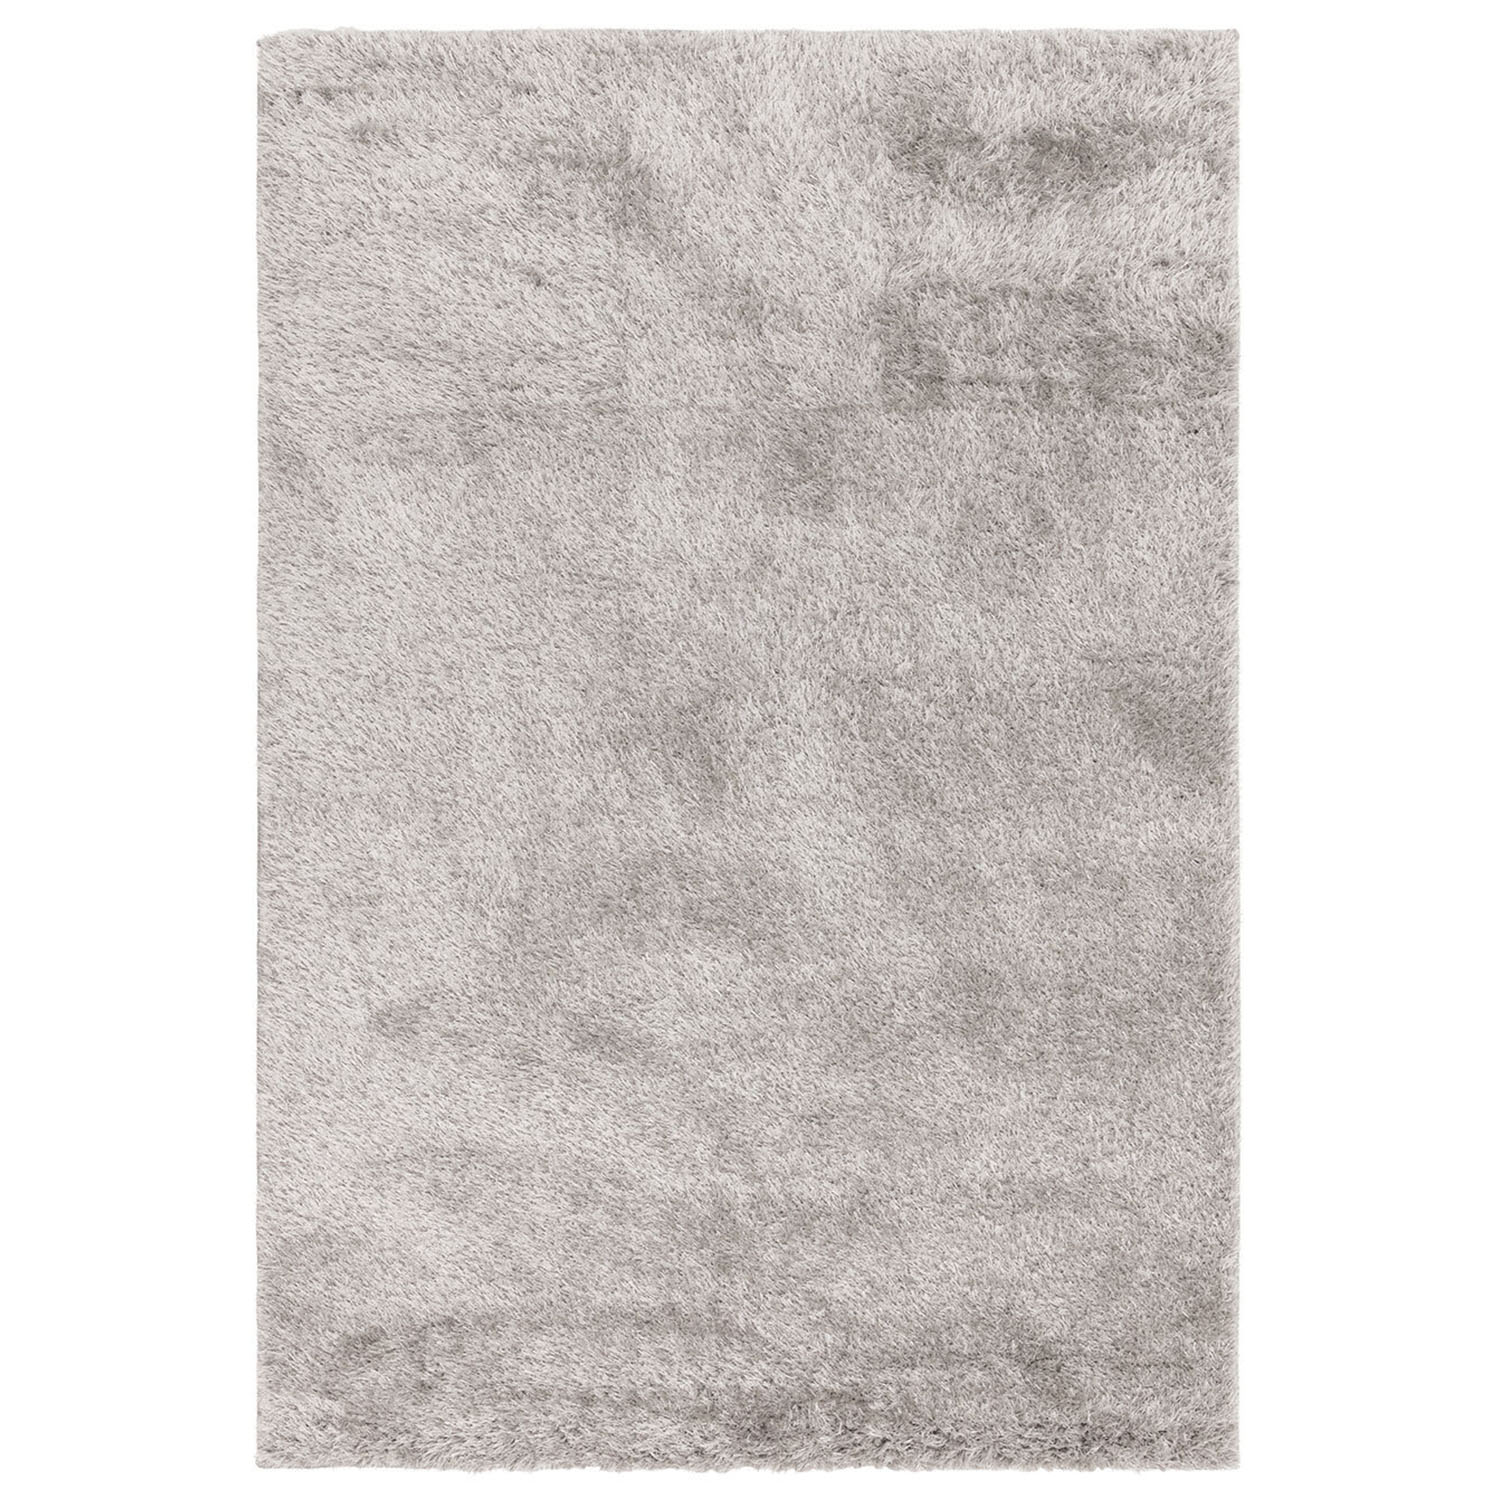 Silver Sumptuous Rug Image 1